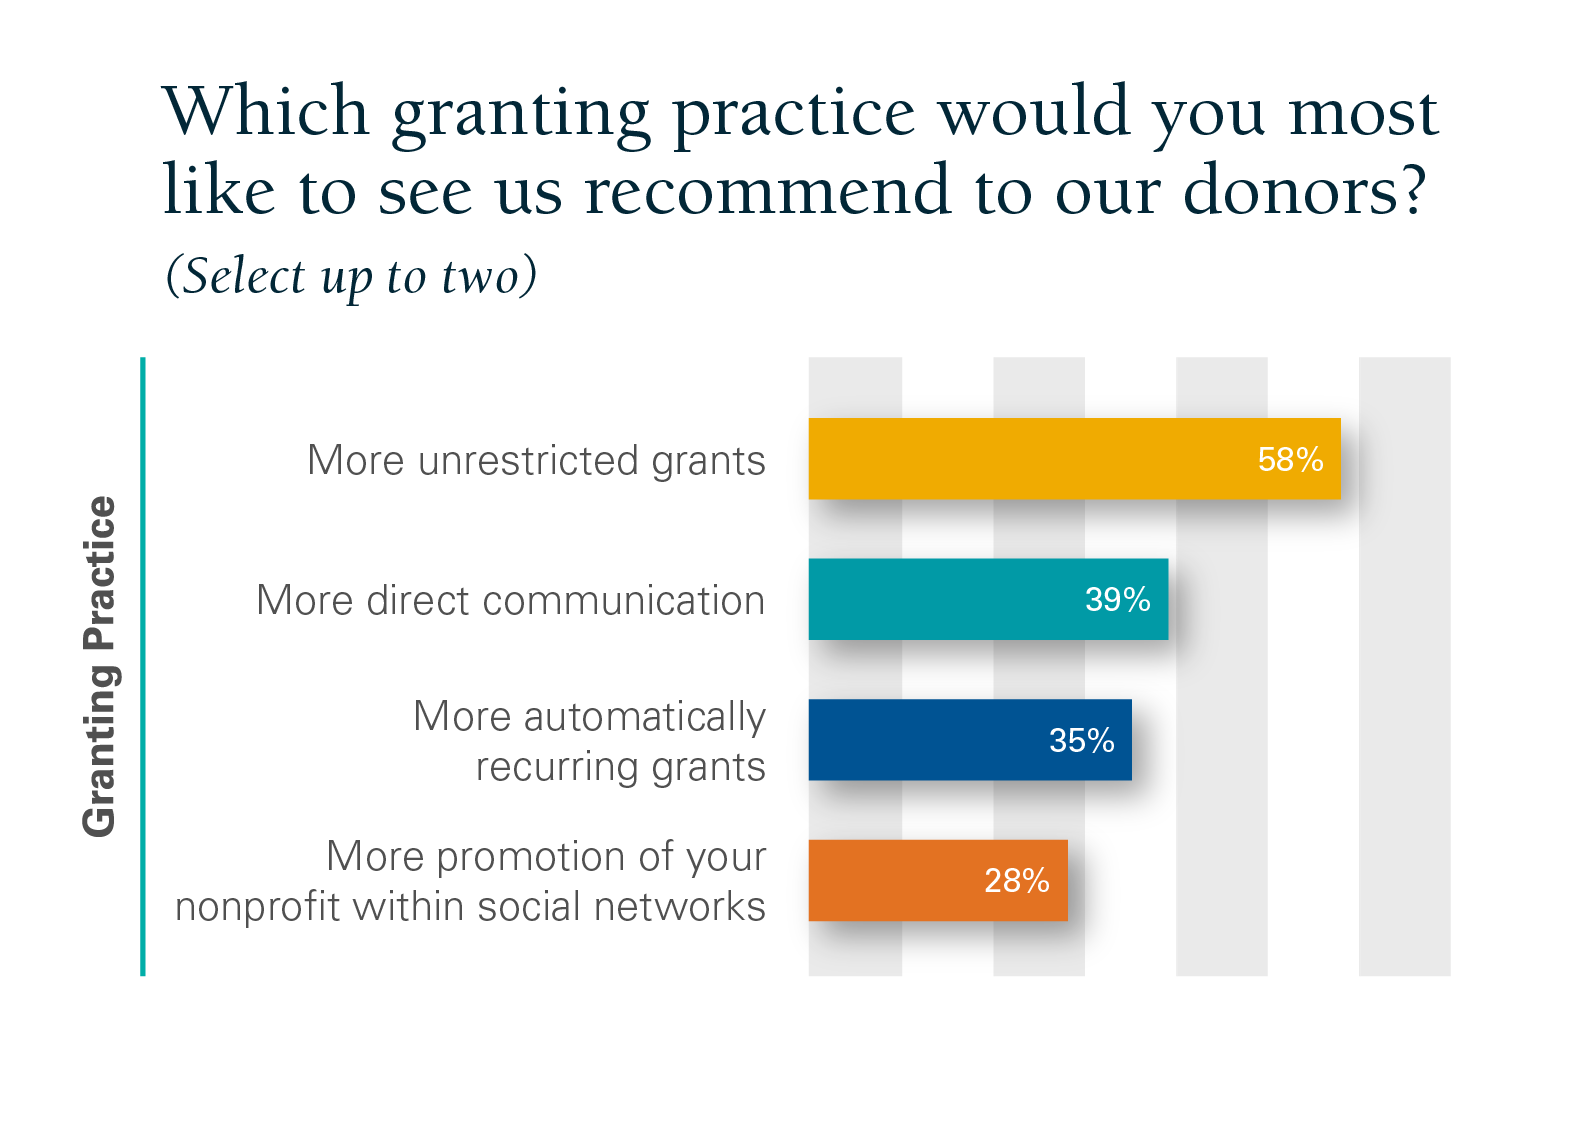 Top granting practices as recommended by nonprofit organizations. The most popular request is more unrestricted grants, with 58% support.